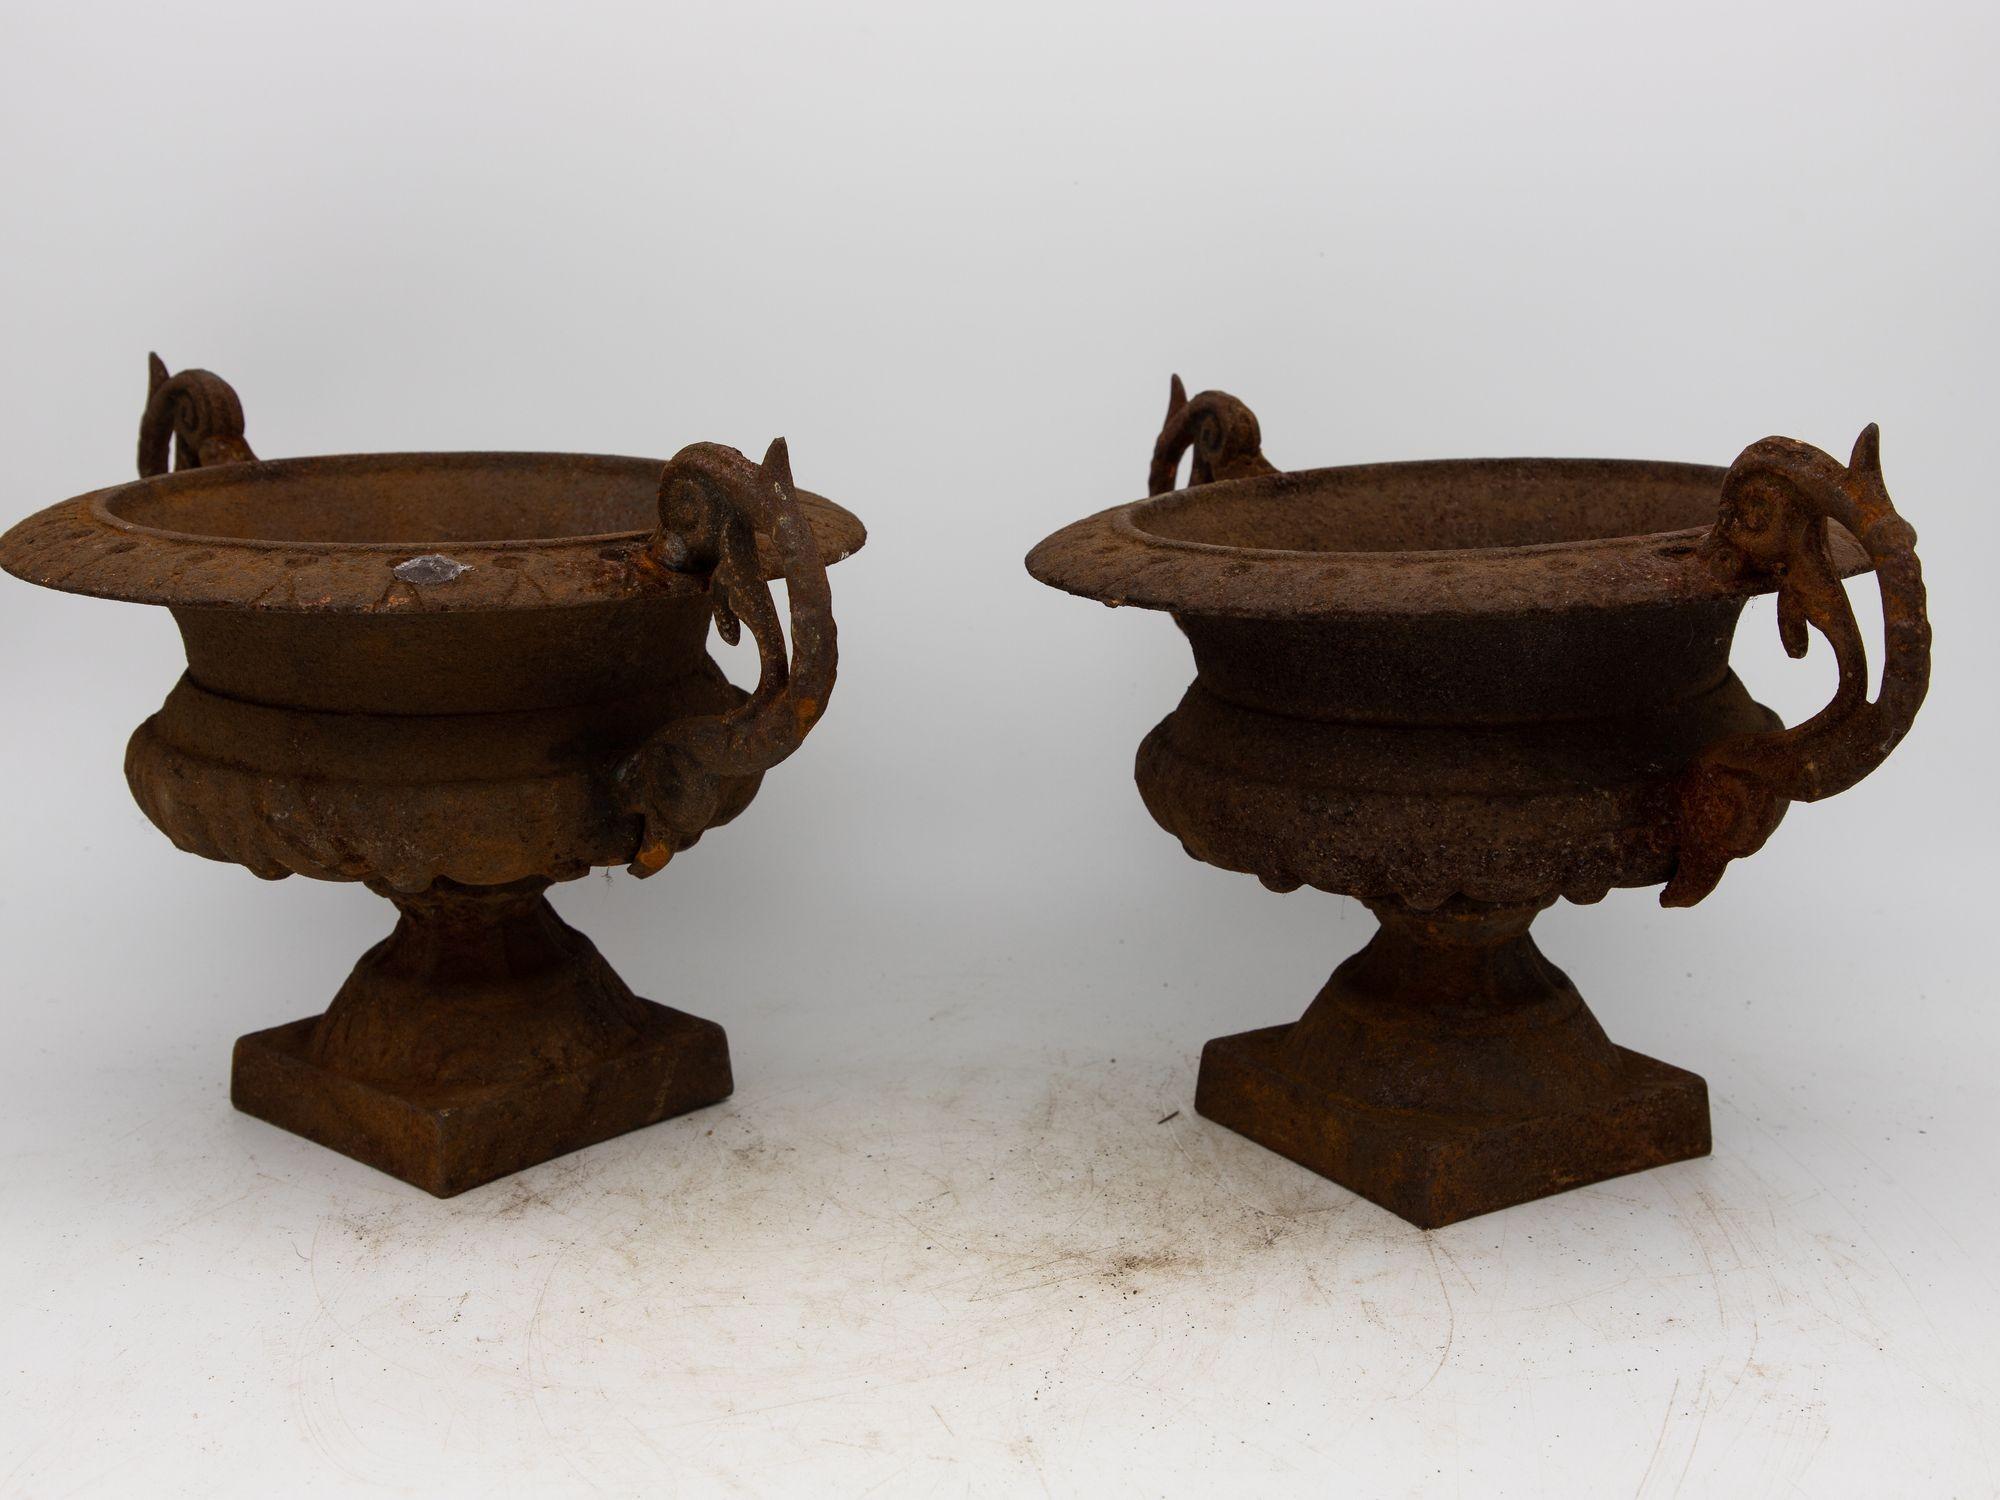 This pair of late 19th-century French cast iron garden urns exude timeless elegance and a rich history. Their aged, rusted patina bears witness to decades of weathering, adding authenticity to their charm. The unique lambs tongue pattern on the lip